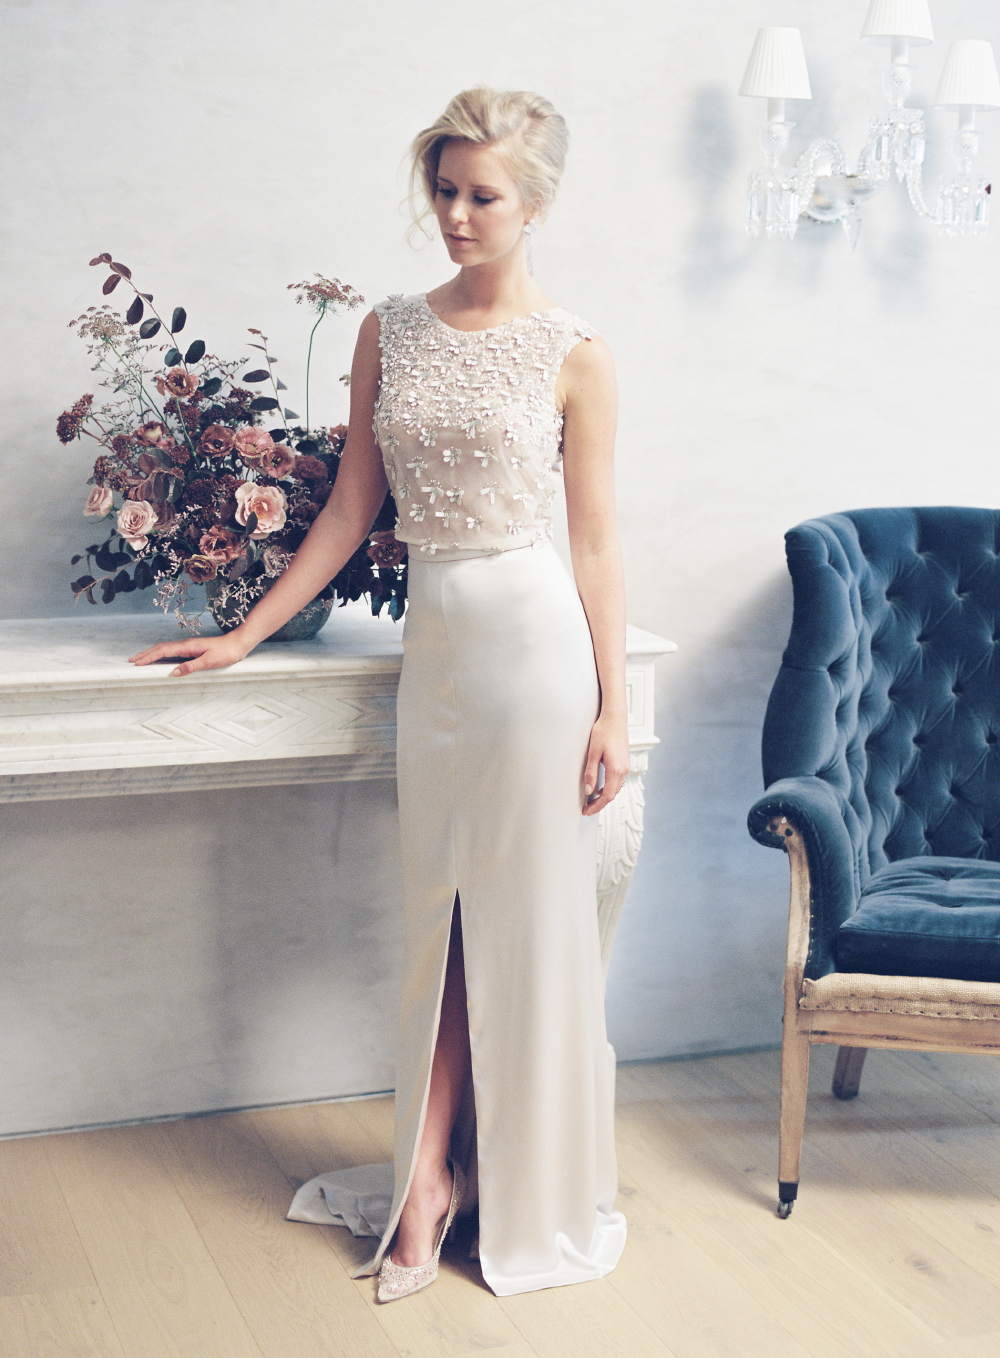 Alina bridal gown by Tanya Anic